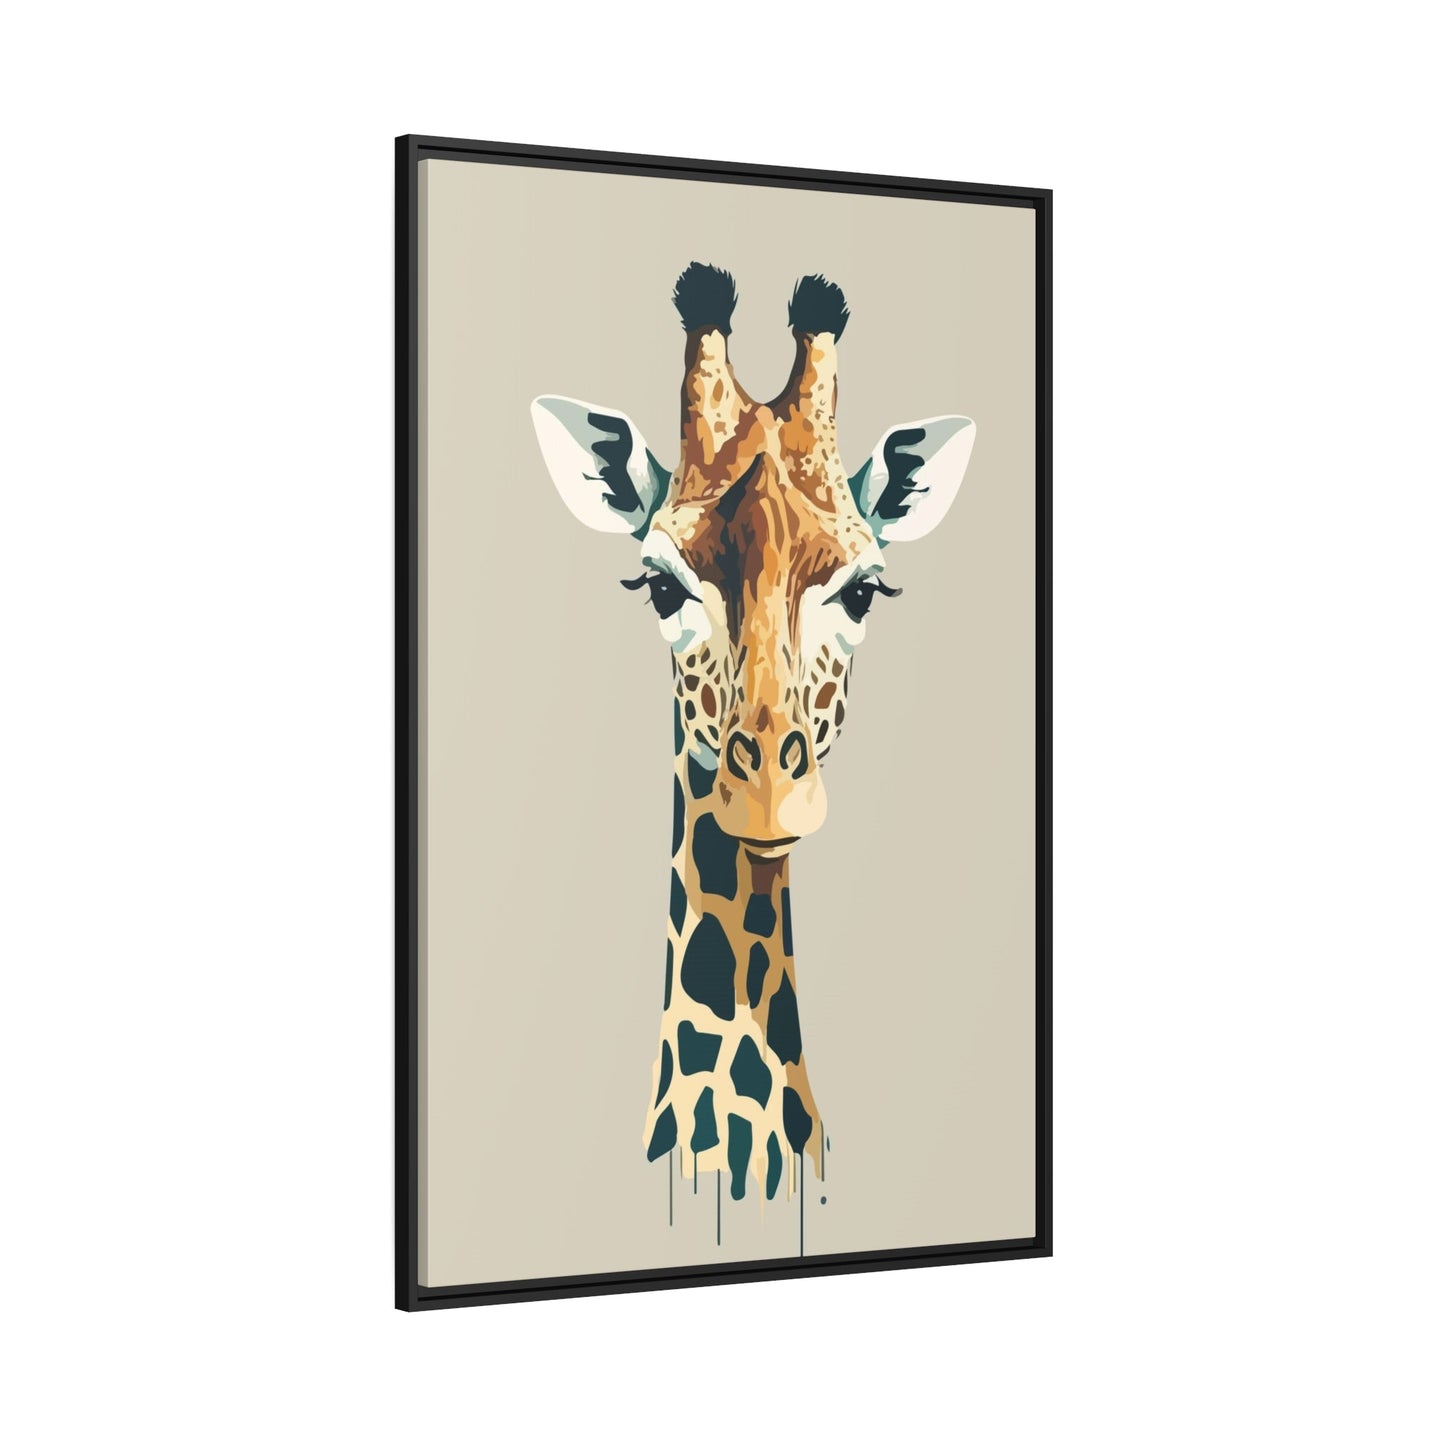 Graceful Giraffe: A Beautifully Rendered Artwork on Canvas & Poster